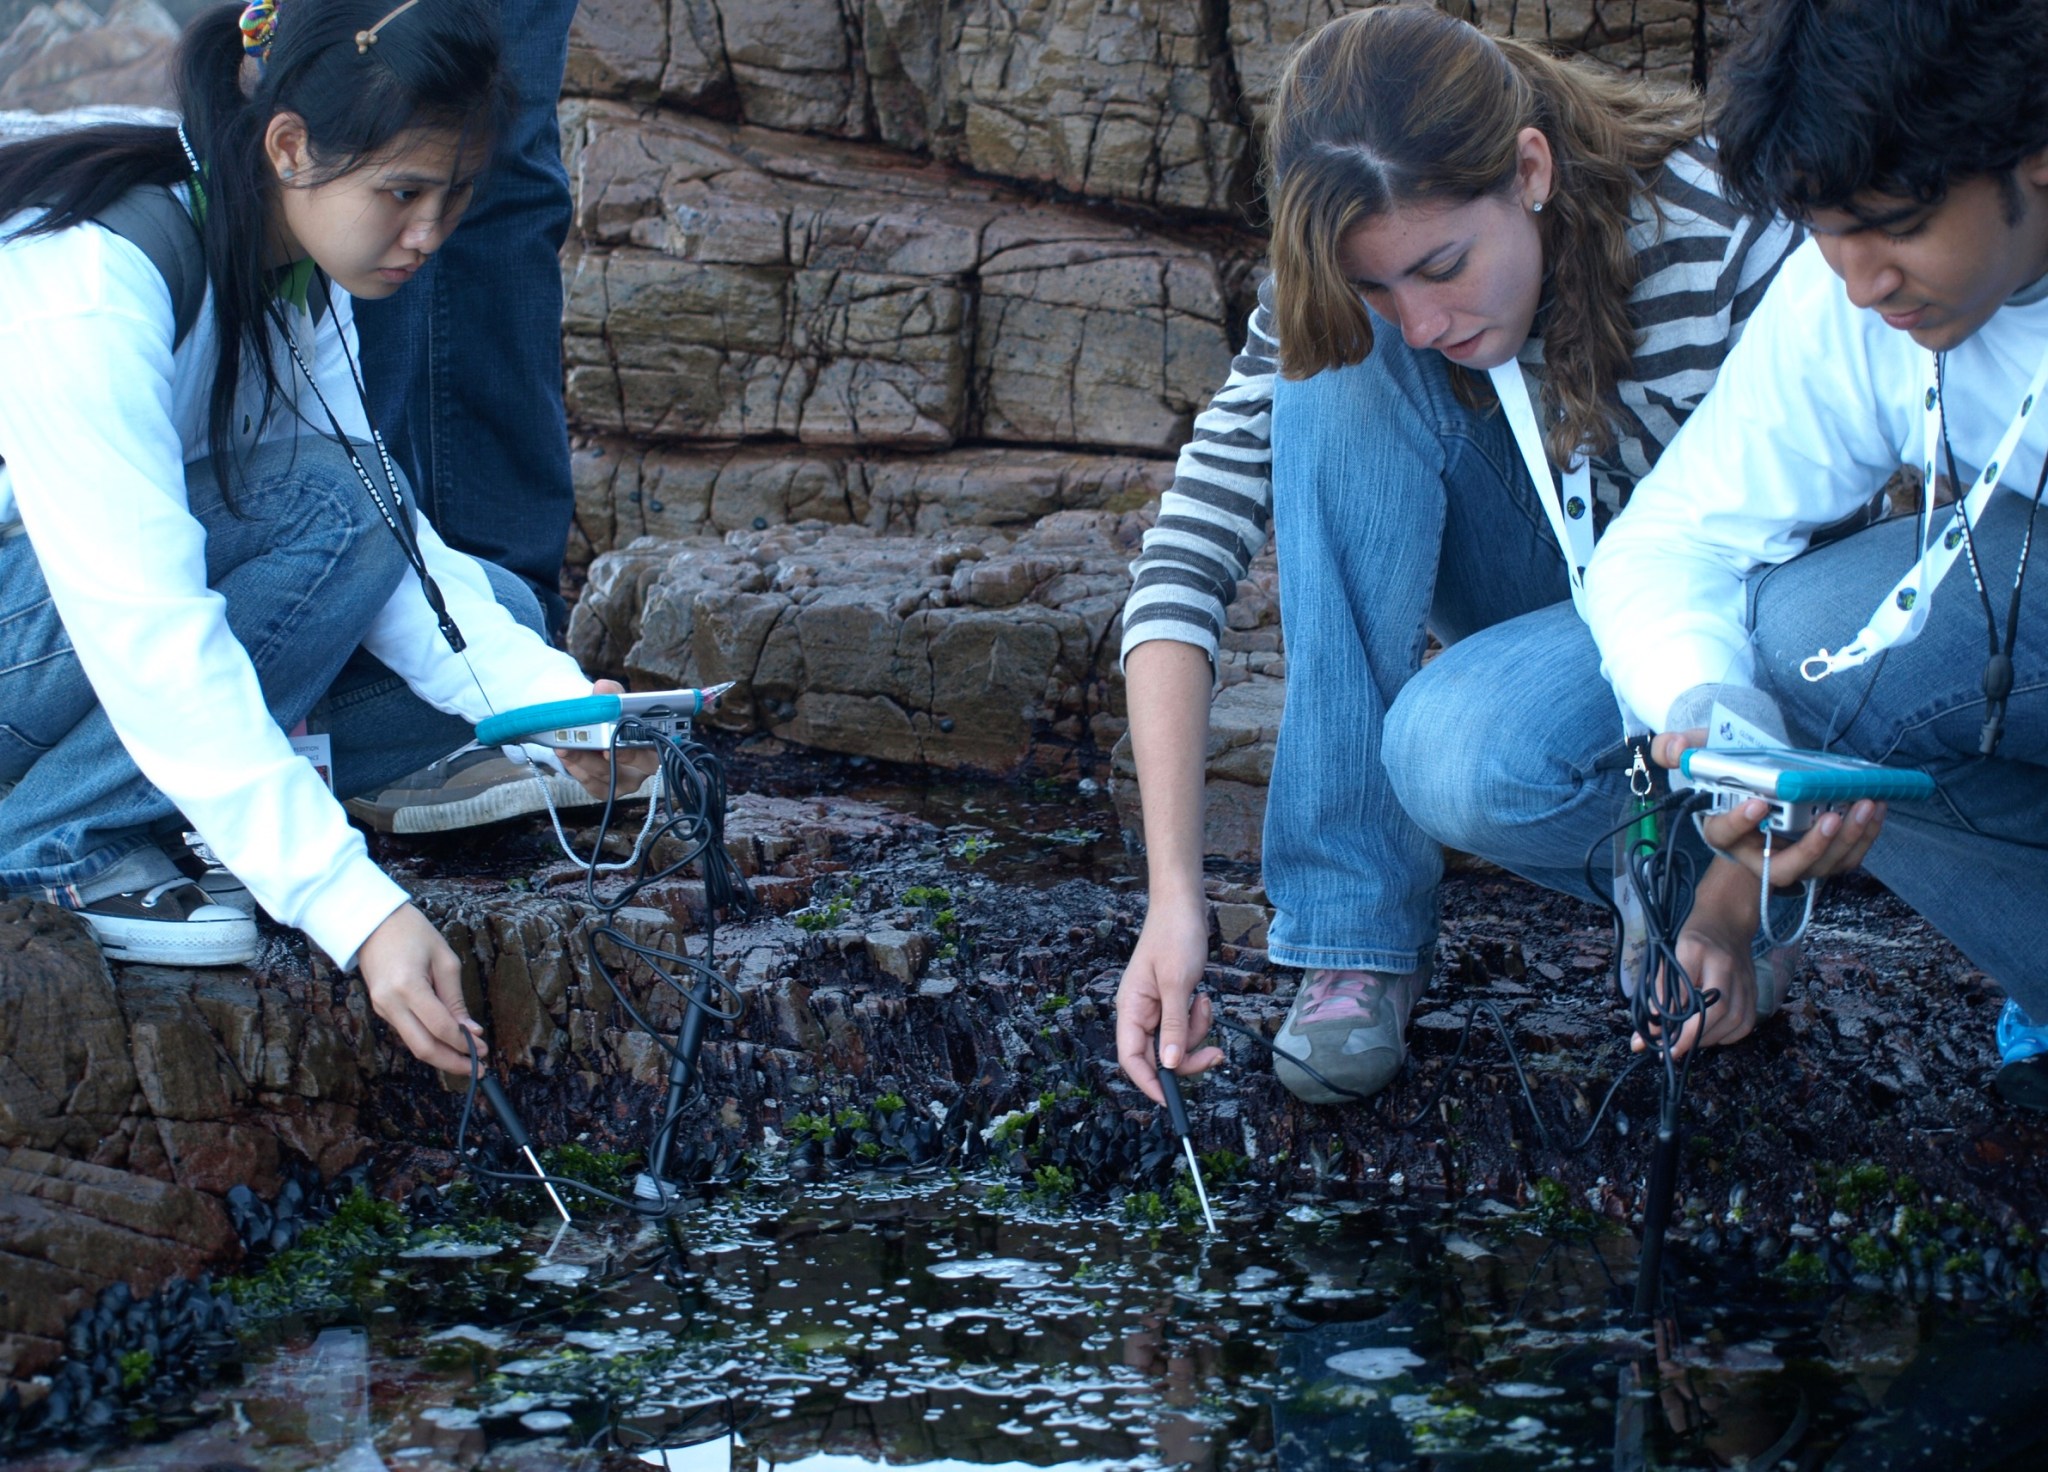 Students participate in Earth science activities through GLOBE program